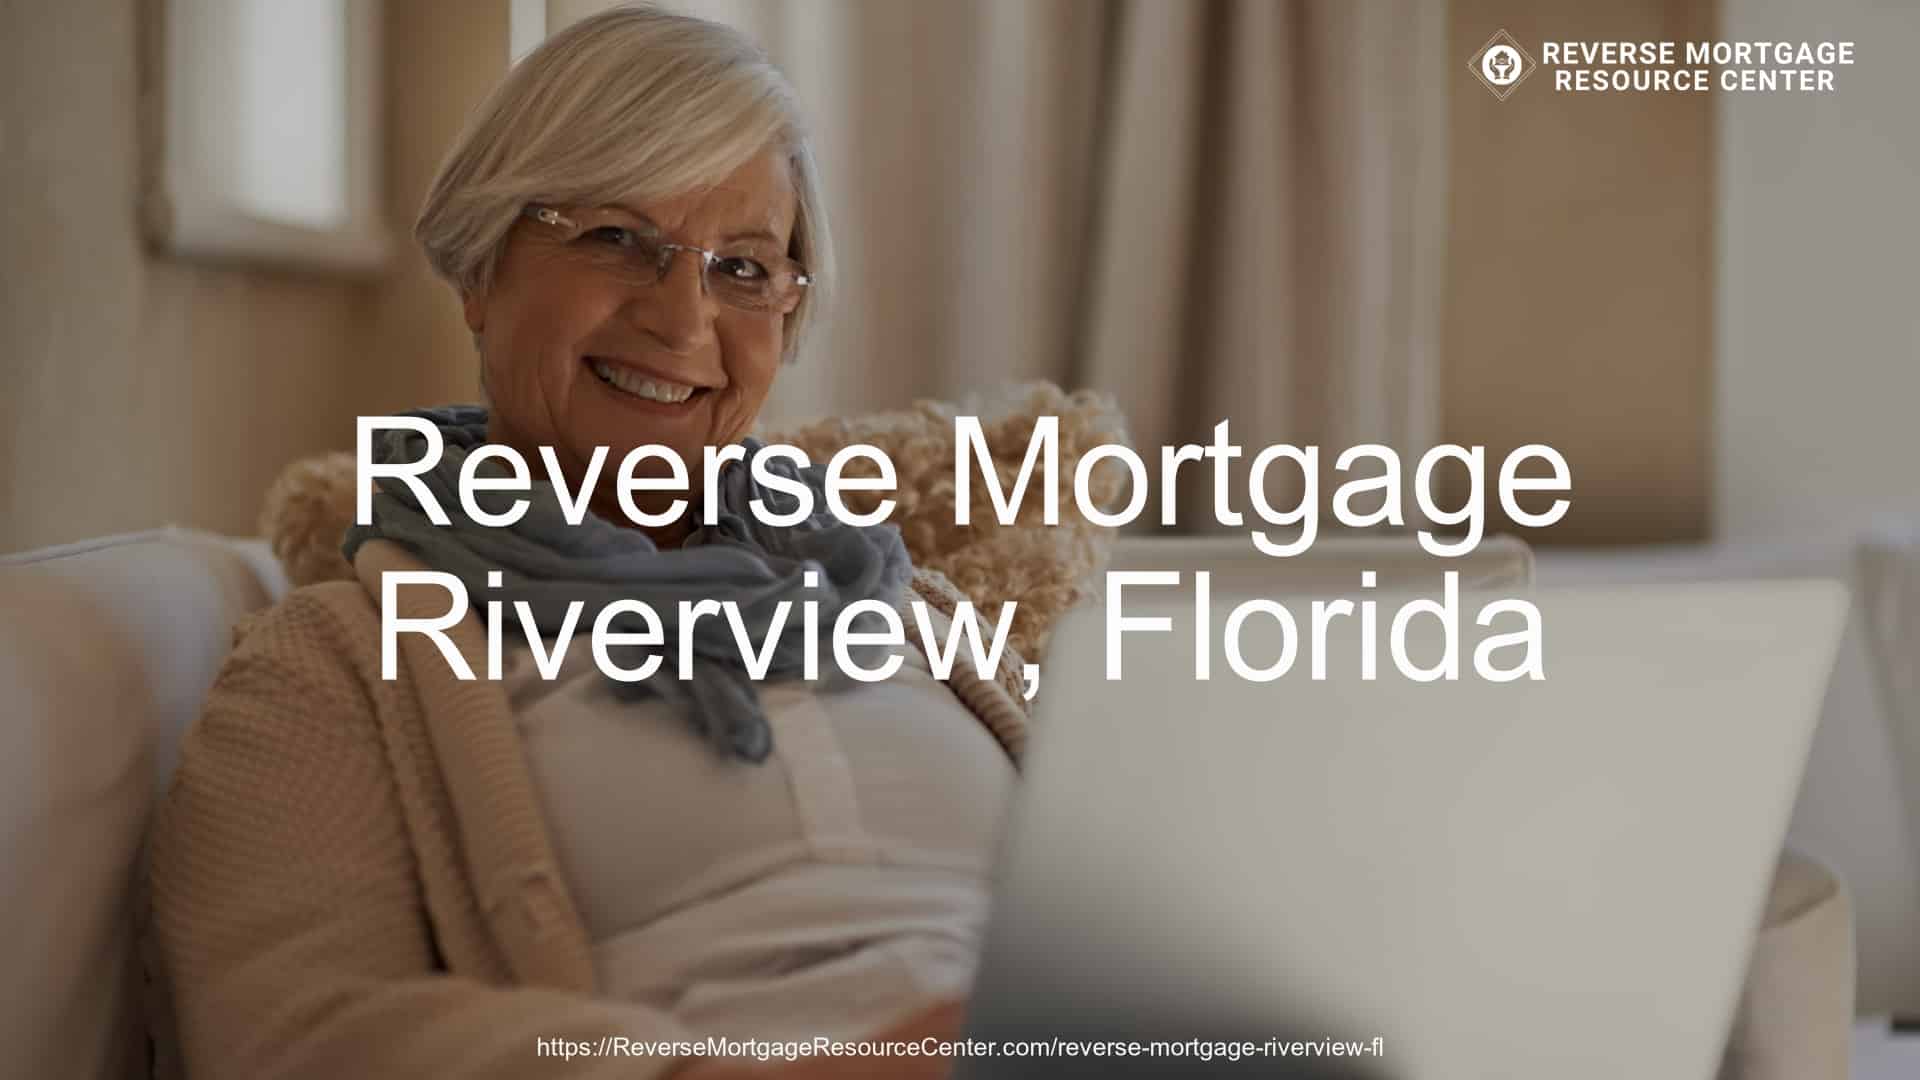 Reverse Mortgage in Riverview, FL